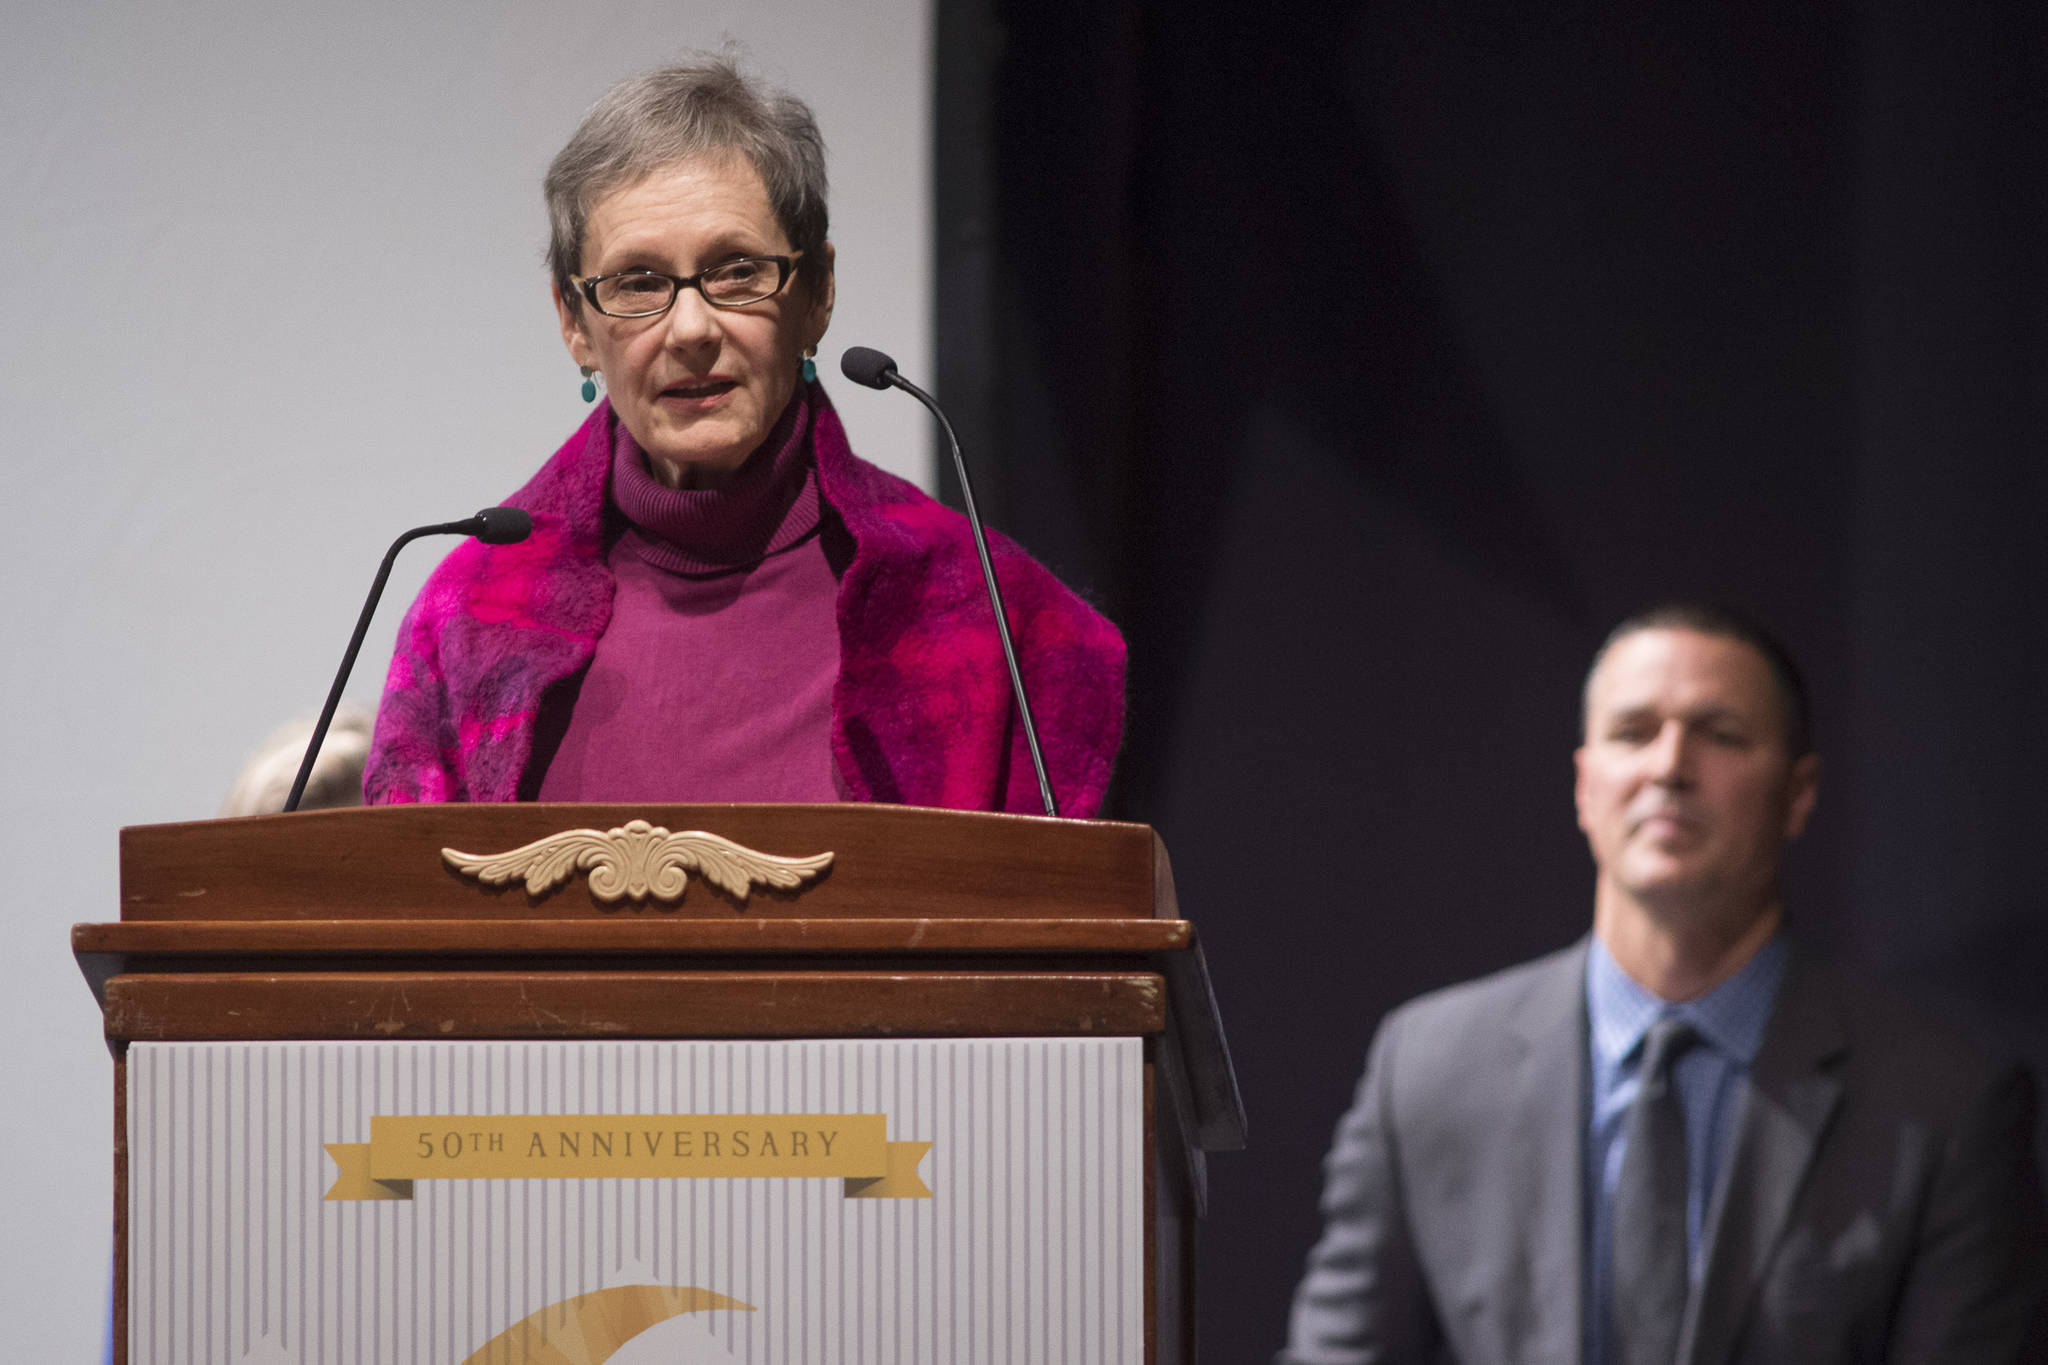 Bede Trantina, of Anchorage, receives her Distinguished Service to the Humanities Award for community at the 2019 Governor’s Arts and Humanities Awards at the Juneau Arts & Culture Center on Thursday, Feb. 7, 2019. (Michael Penn | Juneau Empire)